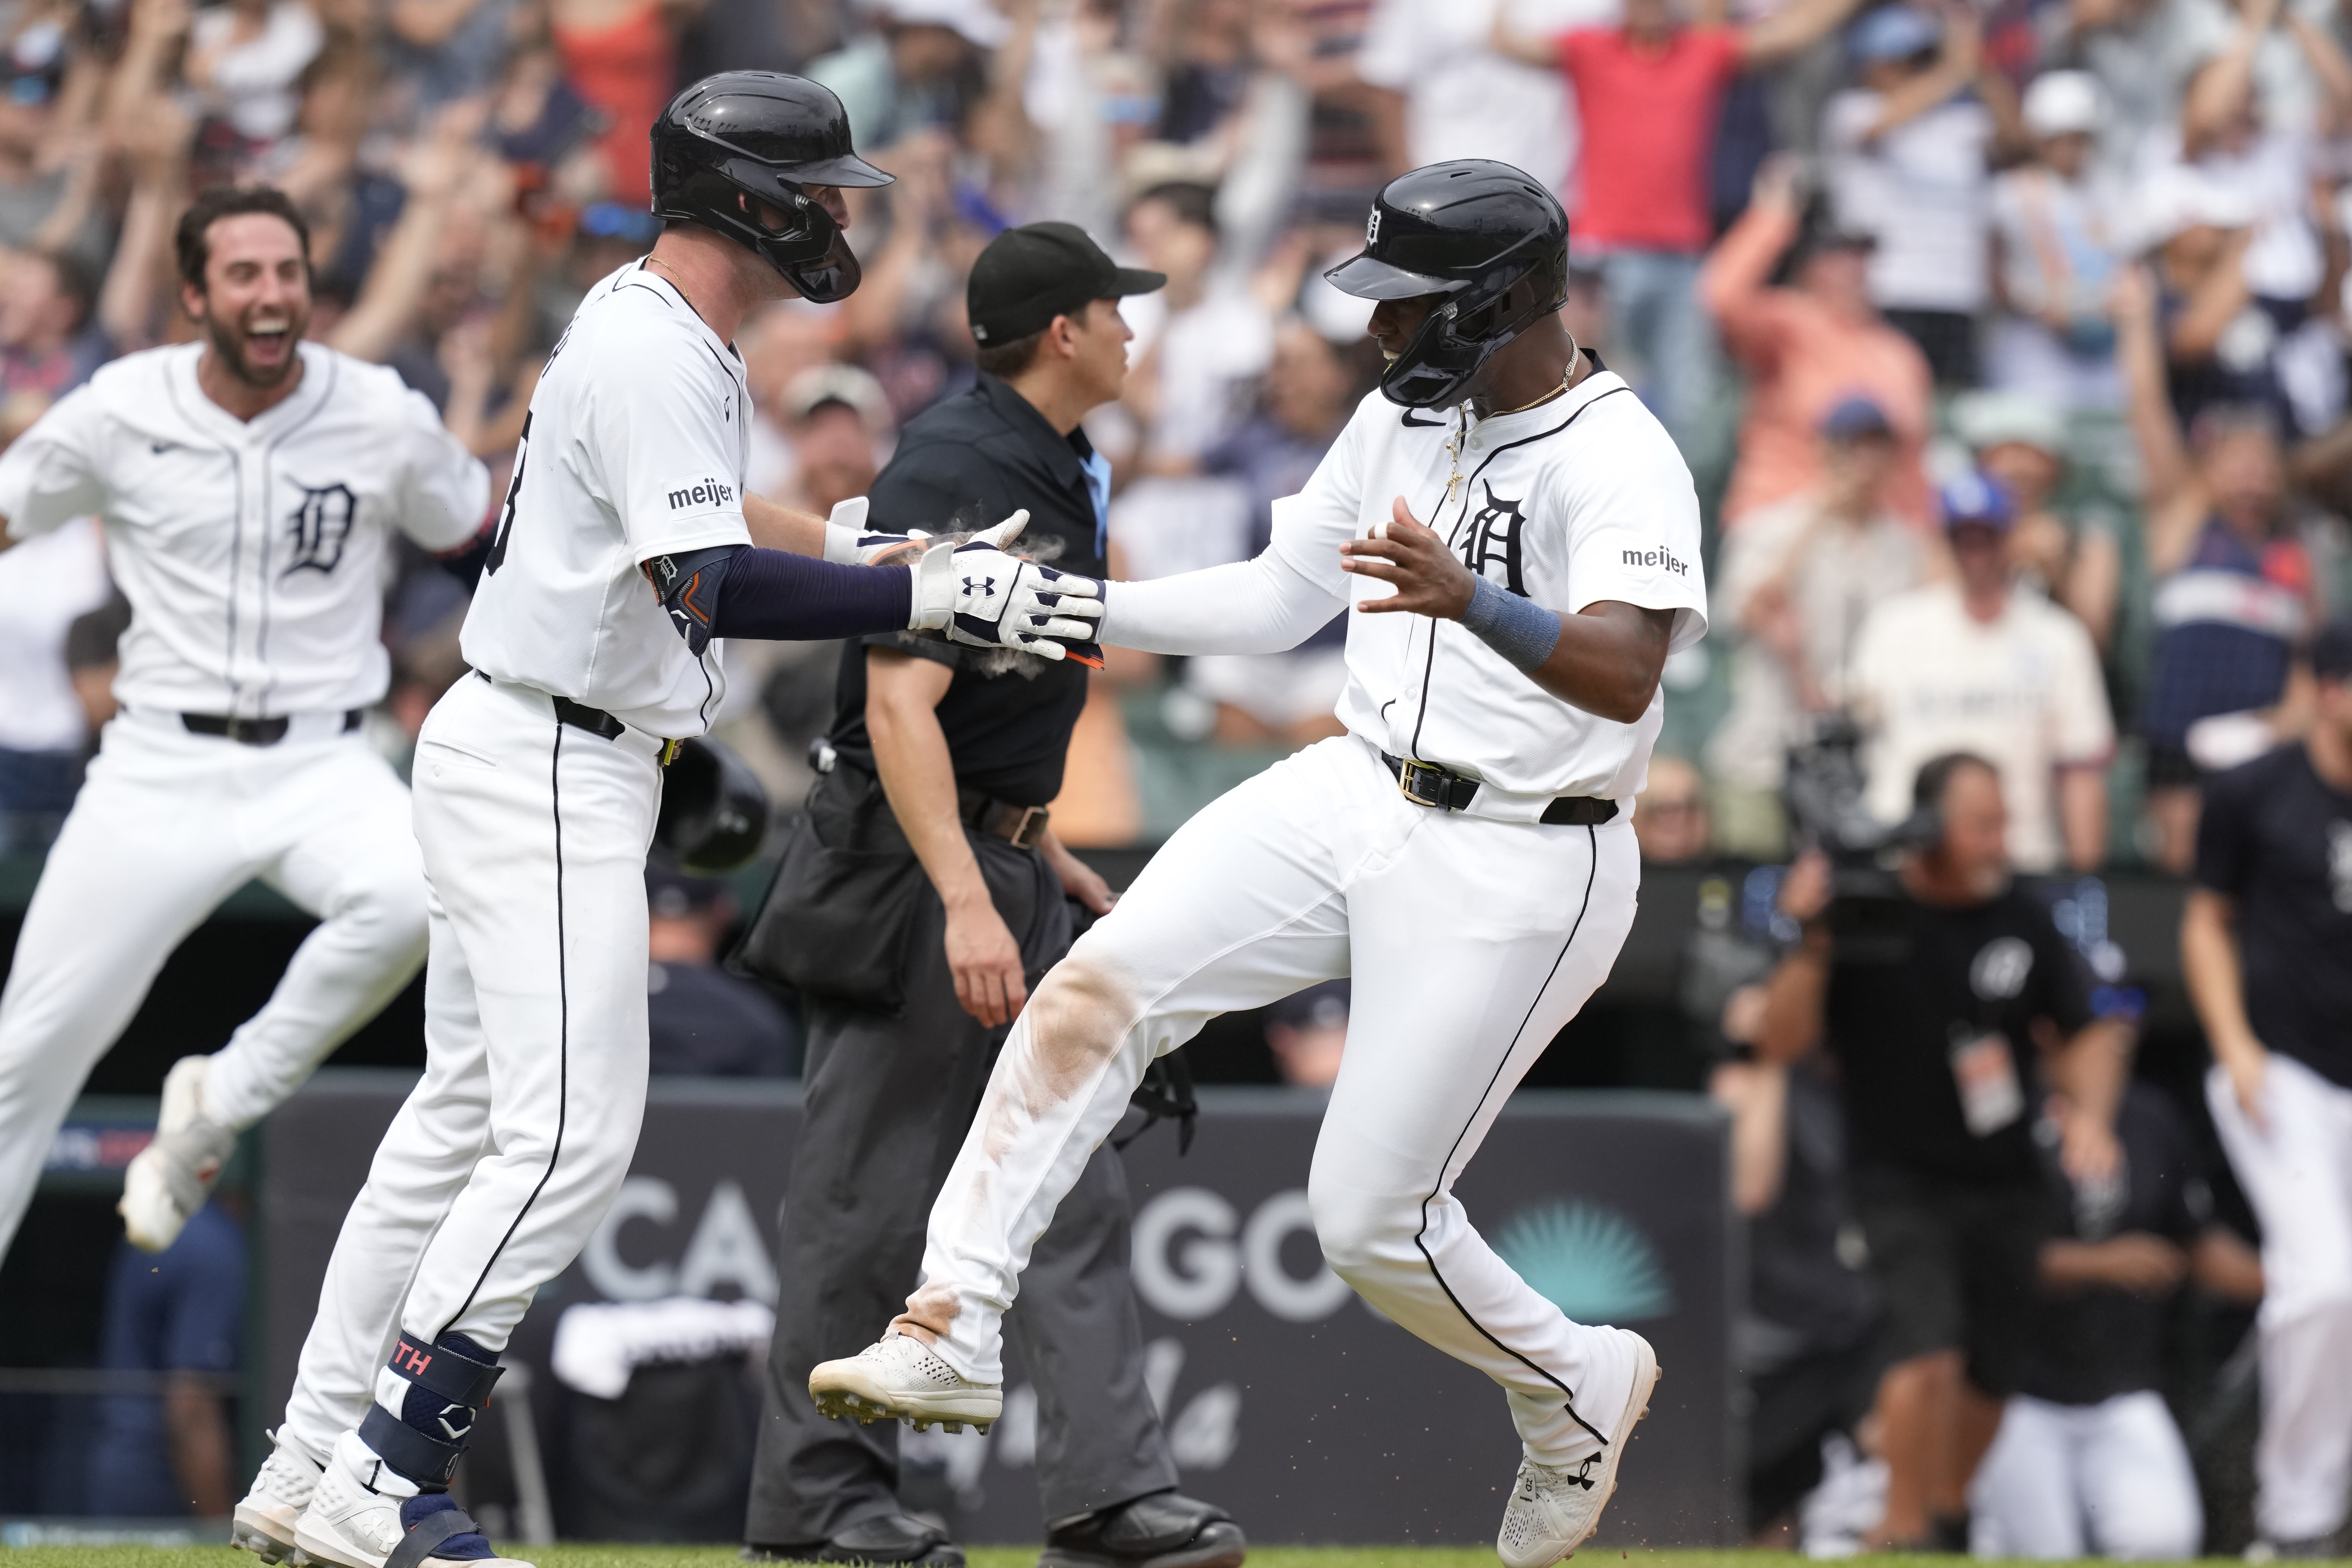 Tigers take advantage of Ramírez errors in 9th inning, beating Dodgers 4-3 in 2nd straight comeback